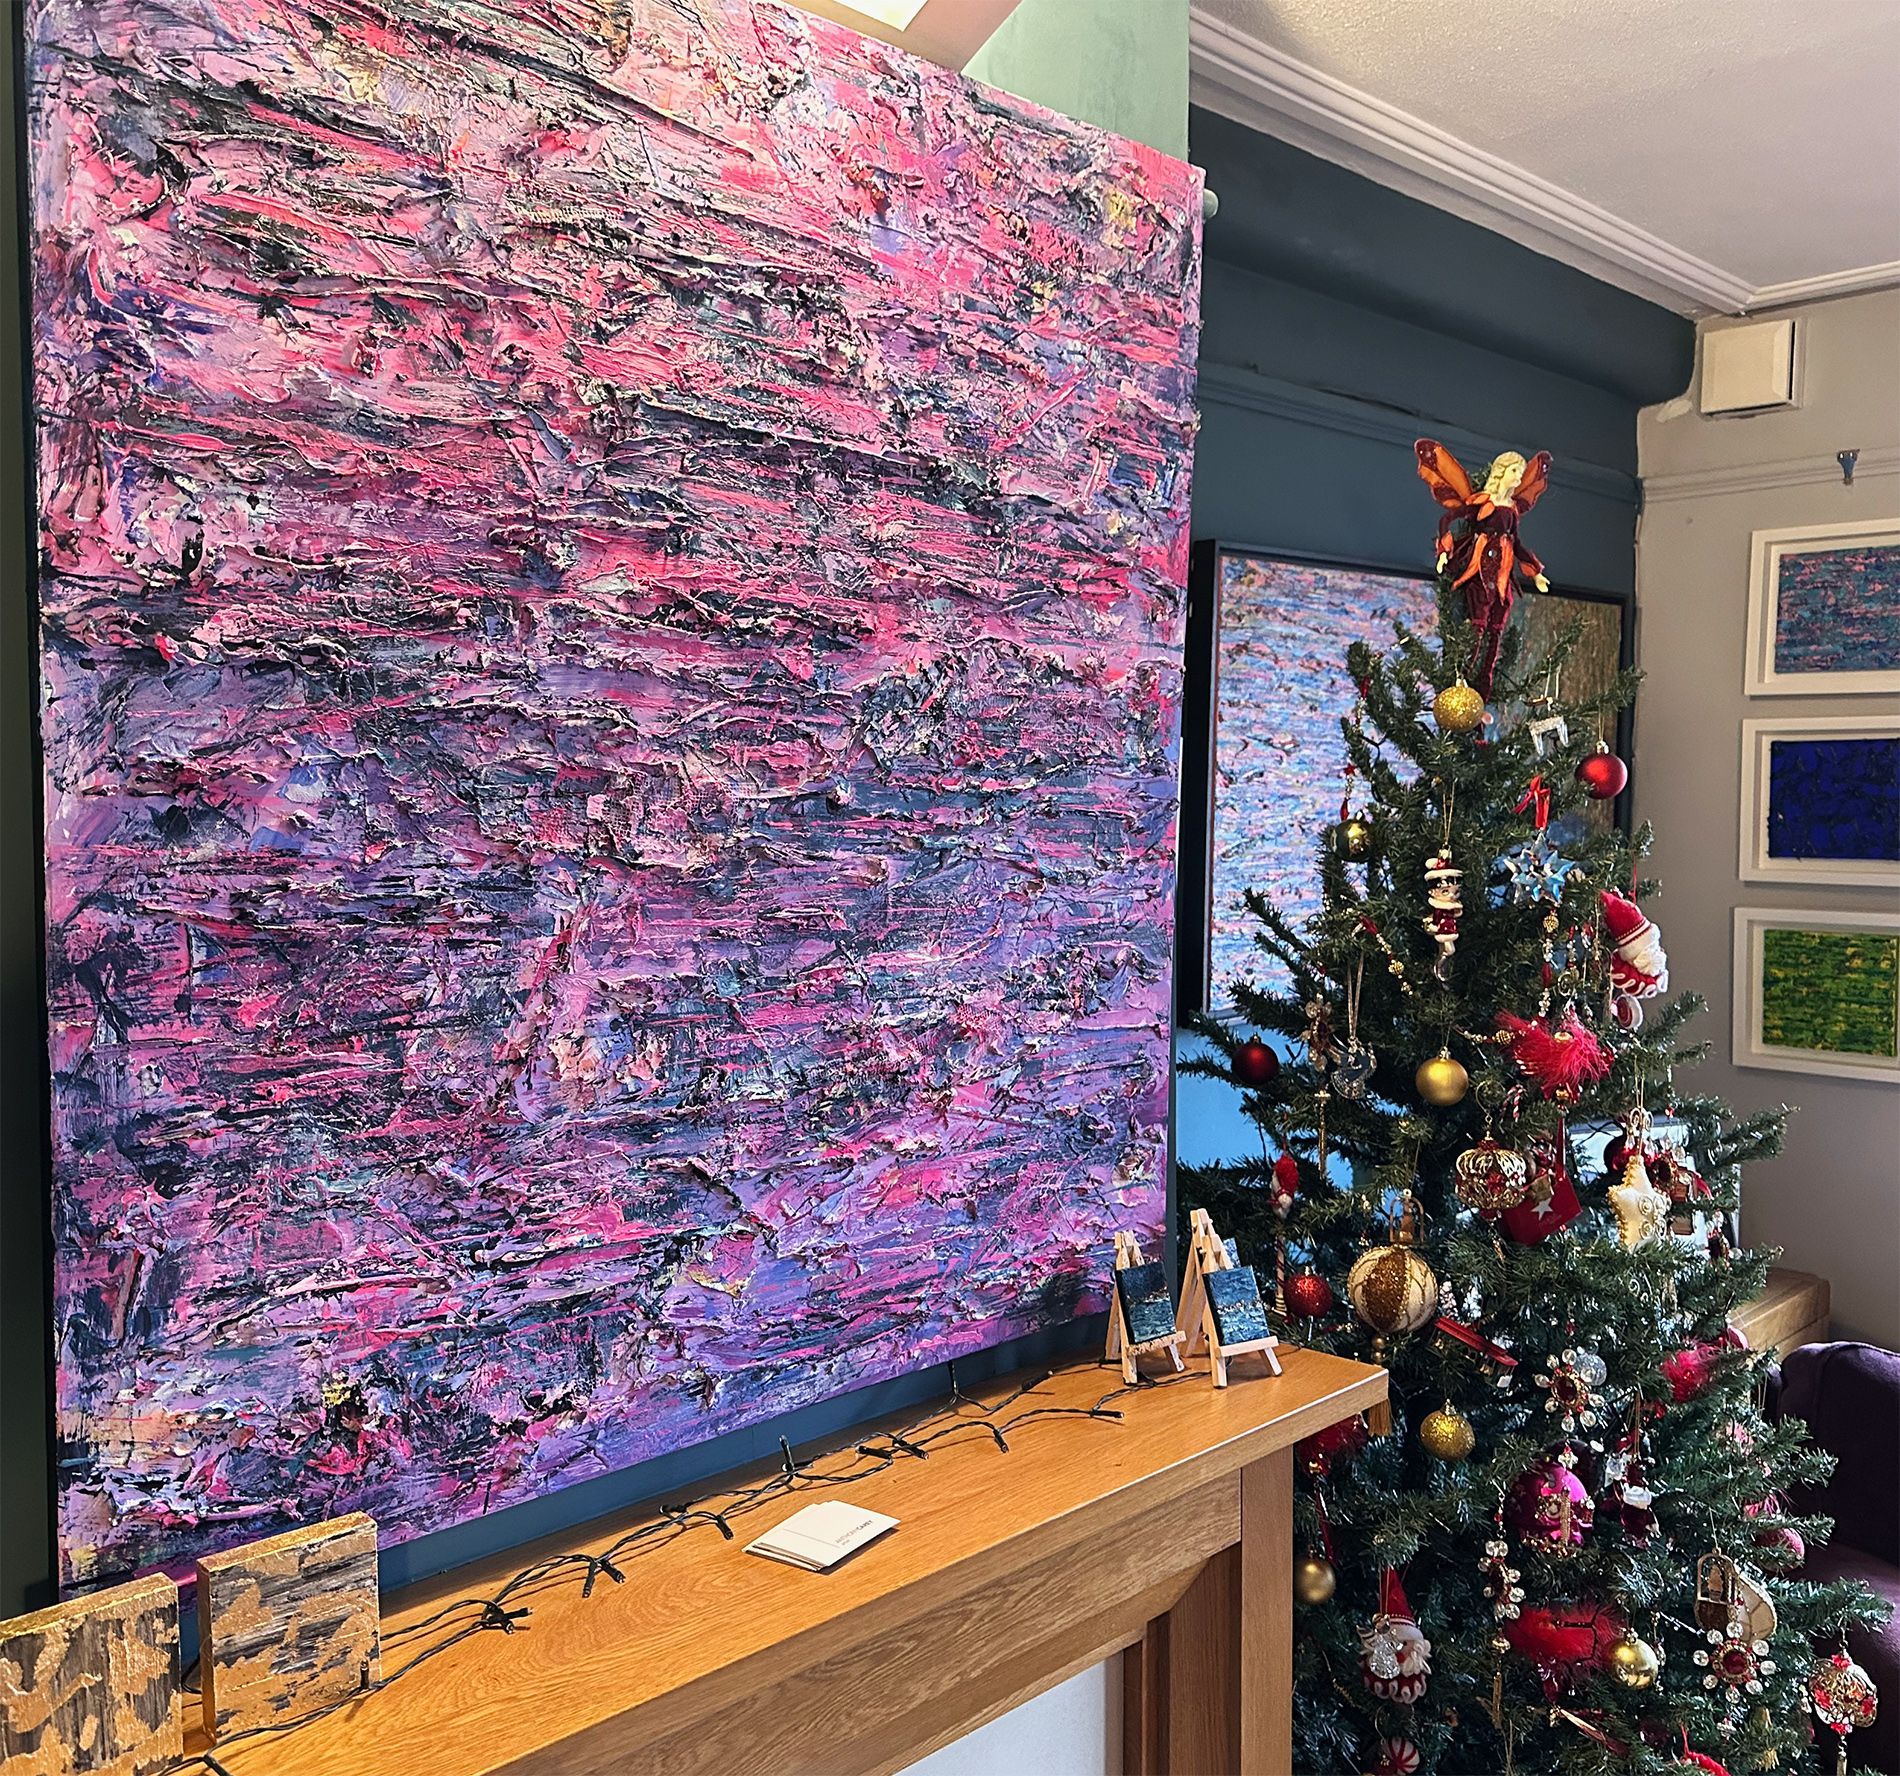 Extra large abstract painting in deep pinks and blues hanging above a fireplace.There is a decorated Christmas tree in the background and some smaller paintings visible